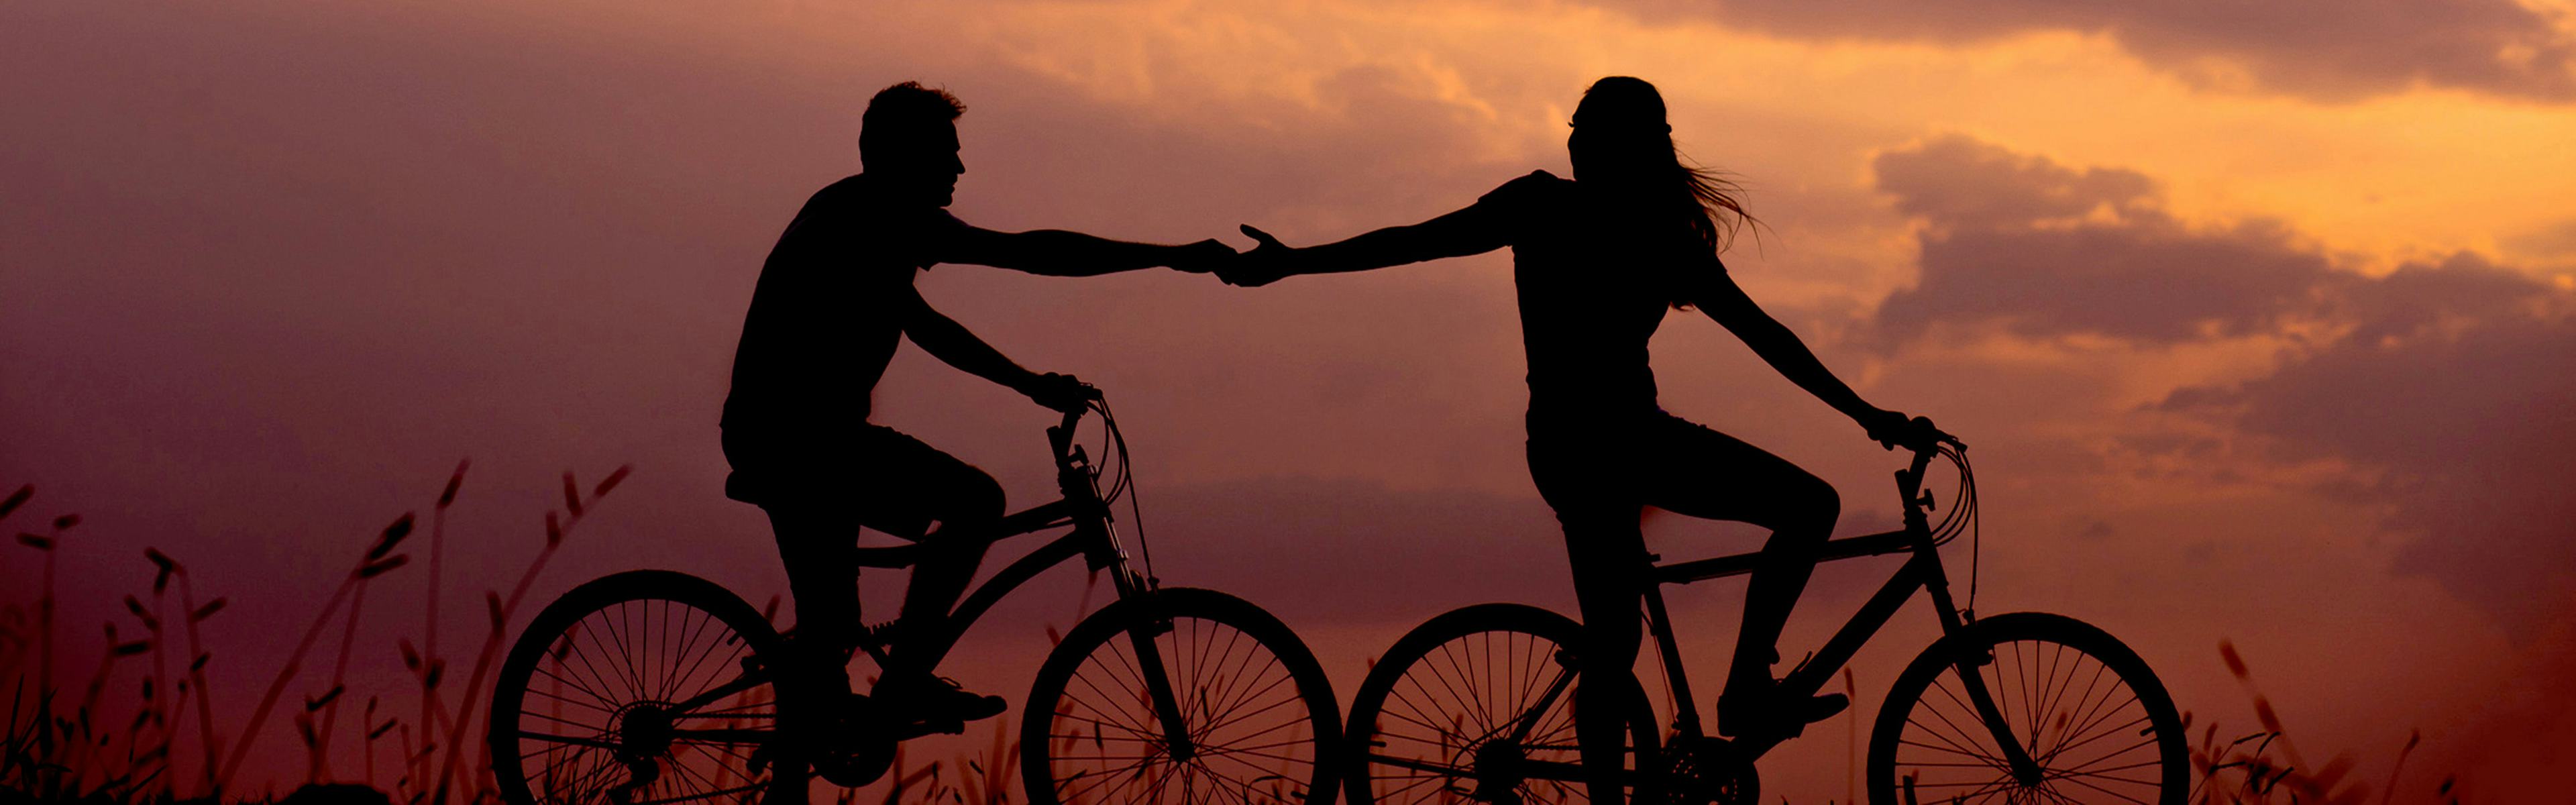 A couple rides bicycles at sunset.